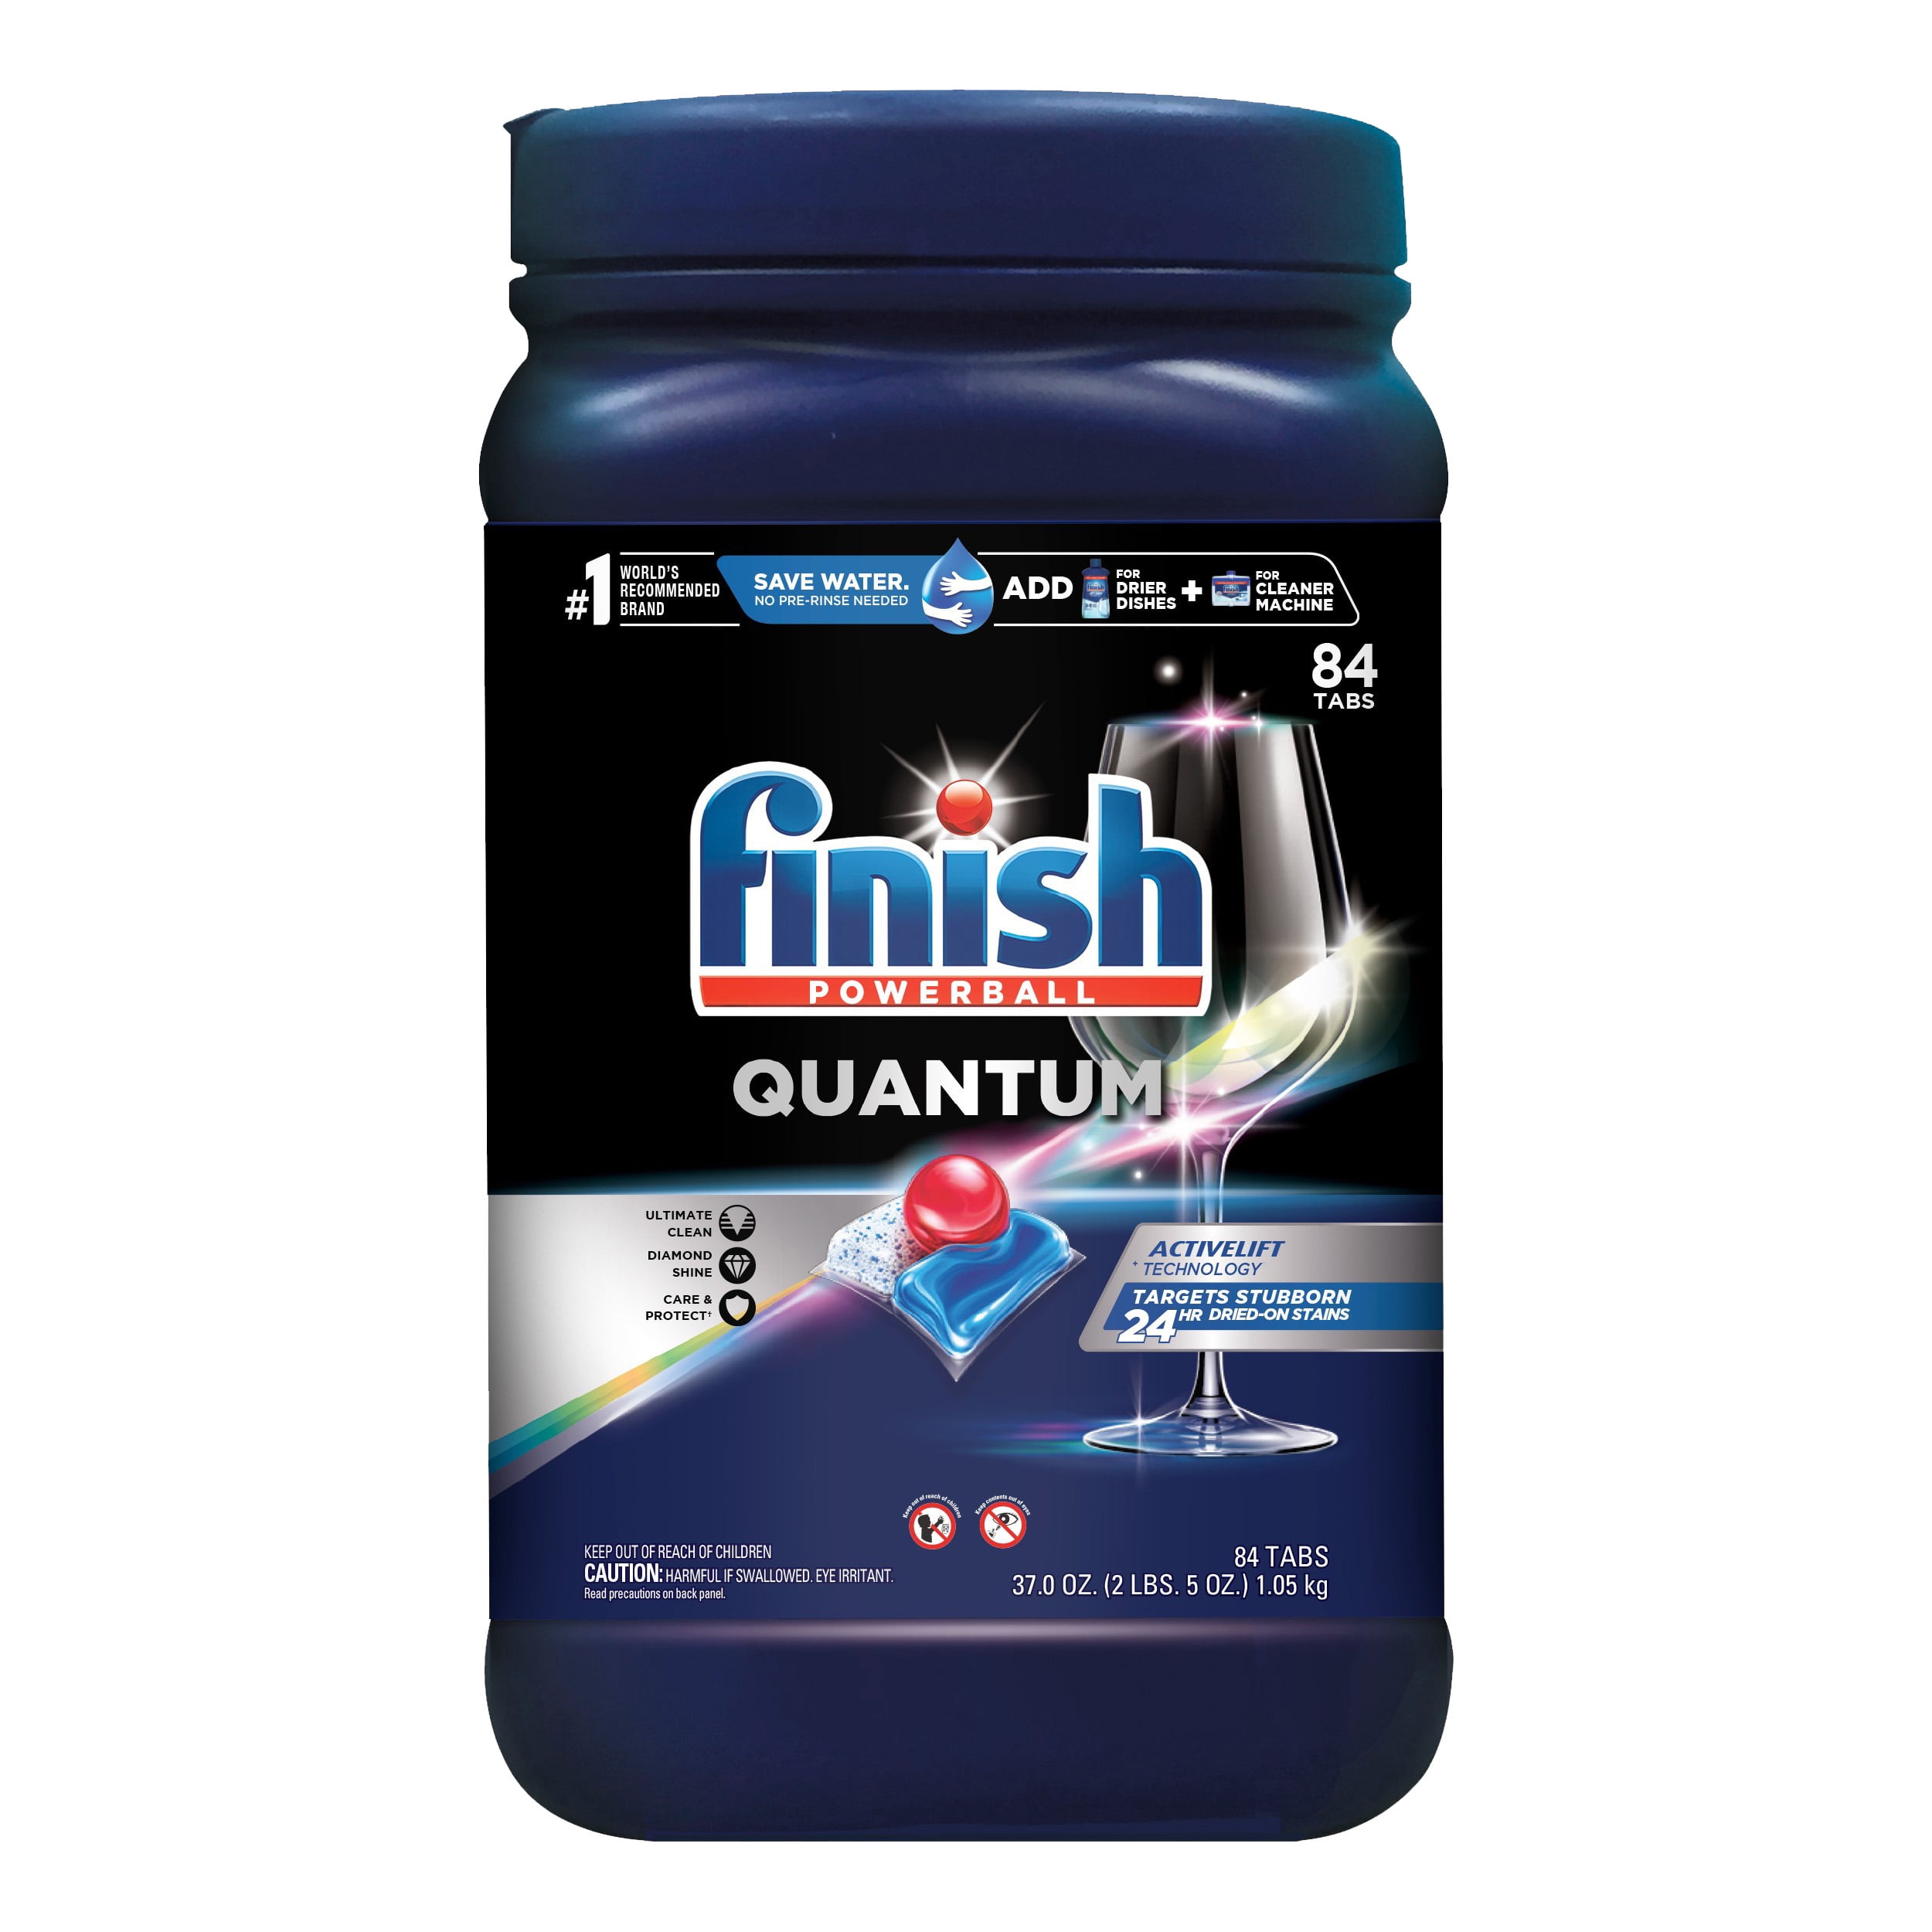 Finish Quantum with Activblu technology 84ct, Dishwasher Detergent Tabs, Ultimate Clean and Shine